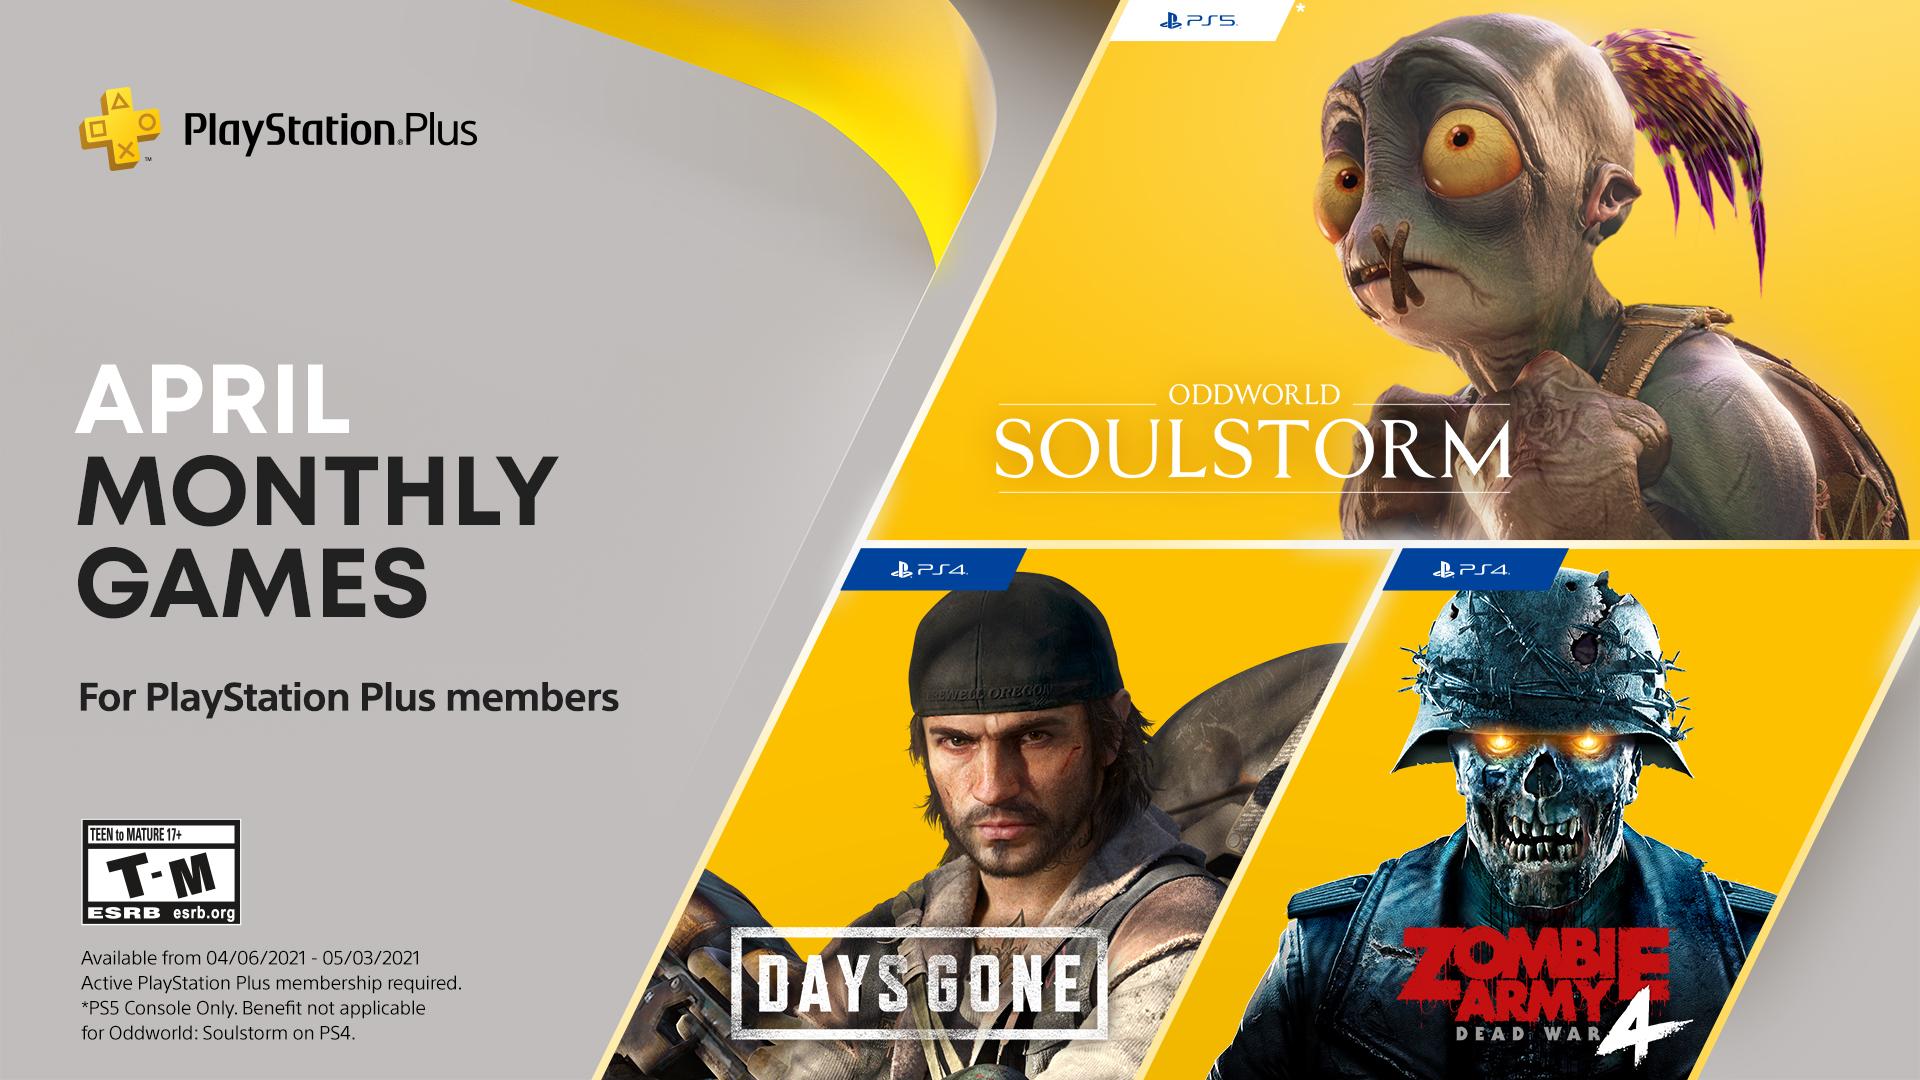 PlayStation Plus PS4, PS5 Free Games For March 2021 Announced